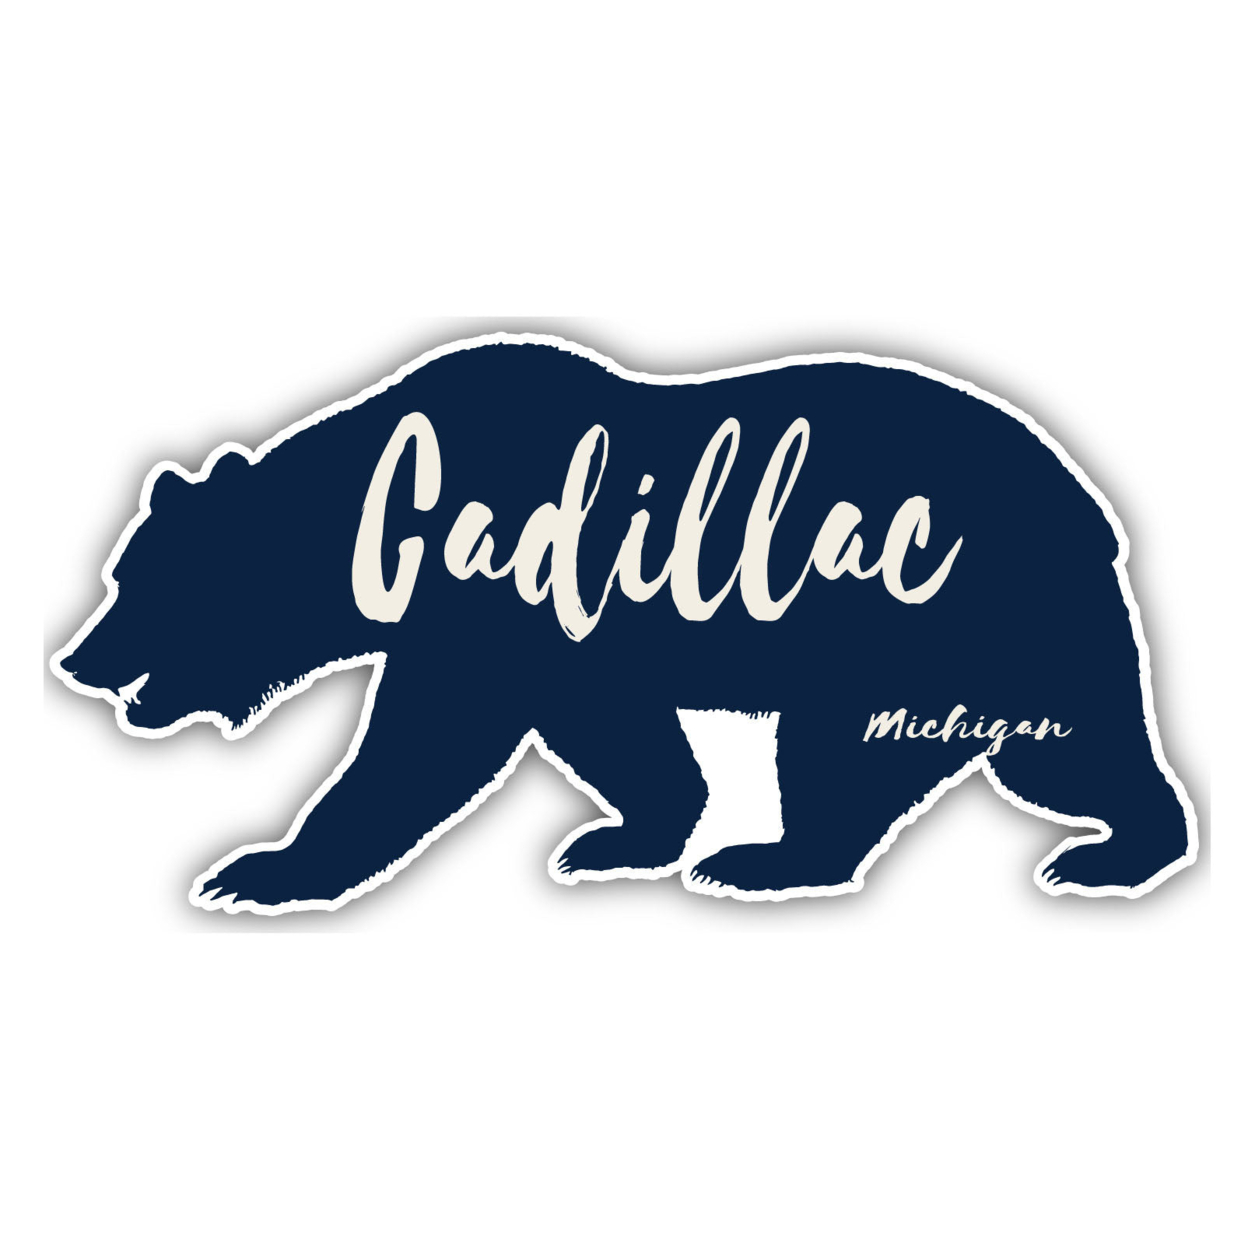 Cadillac Michigan Souvenir Decorative Stickers (Choose Theme And Size) - 4-Pack, 4-Inch, Bear